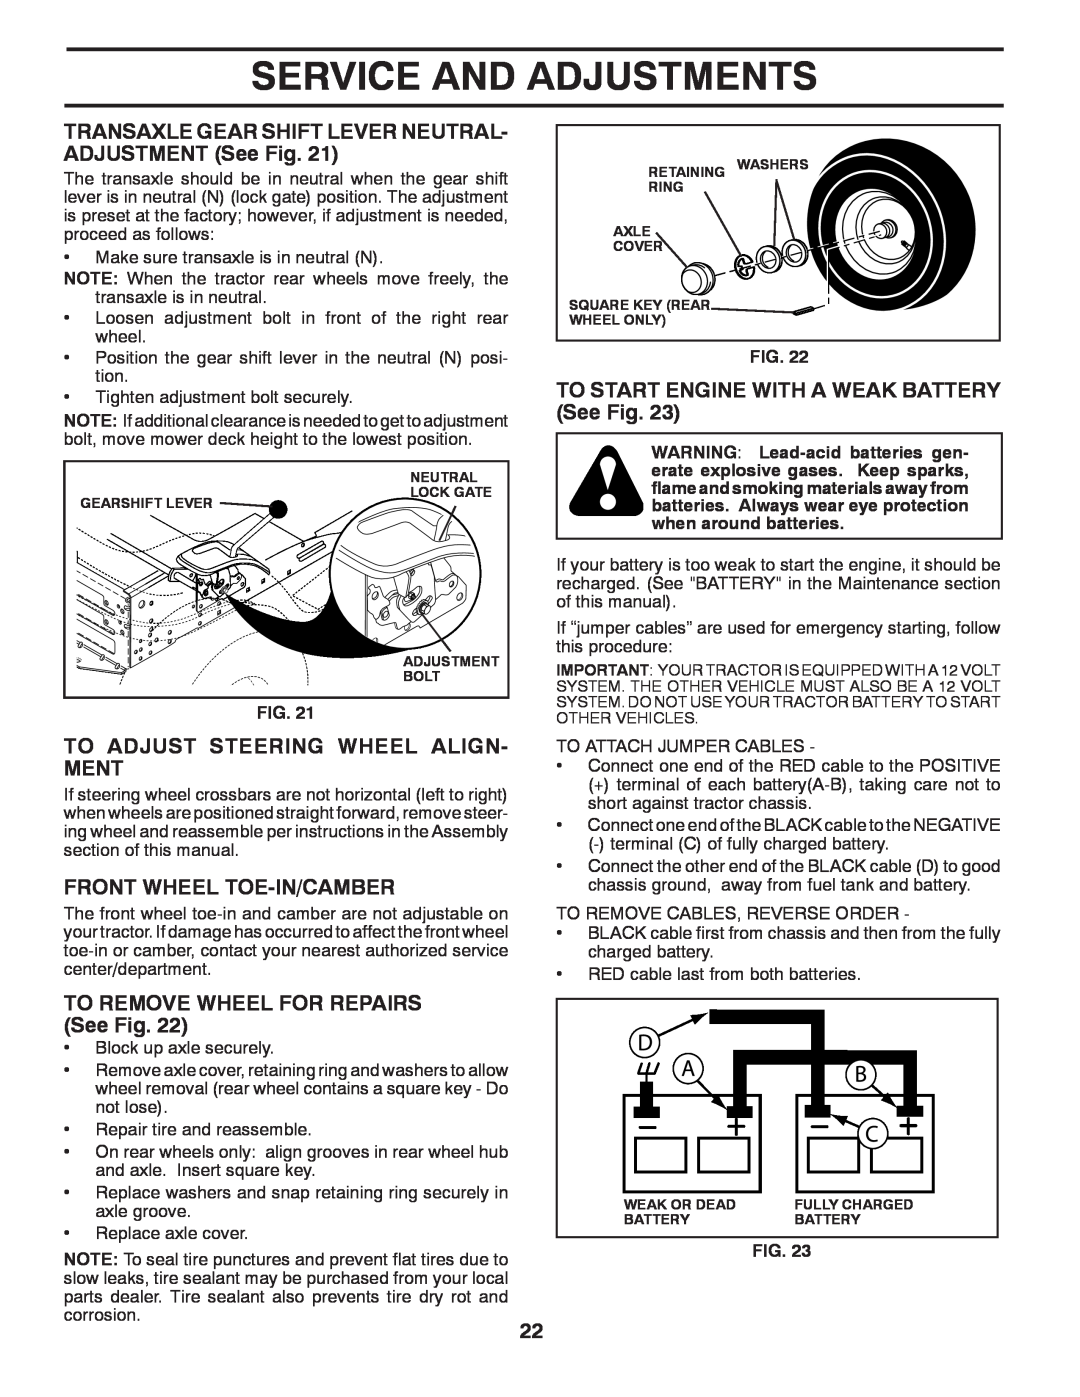 Murray 96012007200 manual TO START ENGINE WITH A WEAK BATTERY See Fig, To Adjust Steering Wheel Align- Ment 